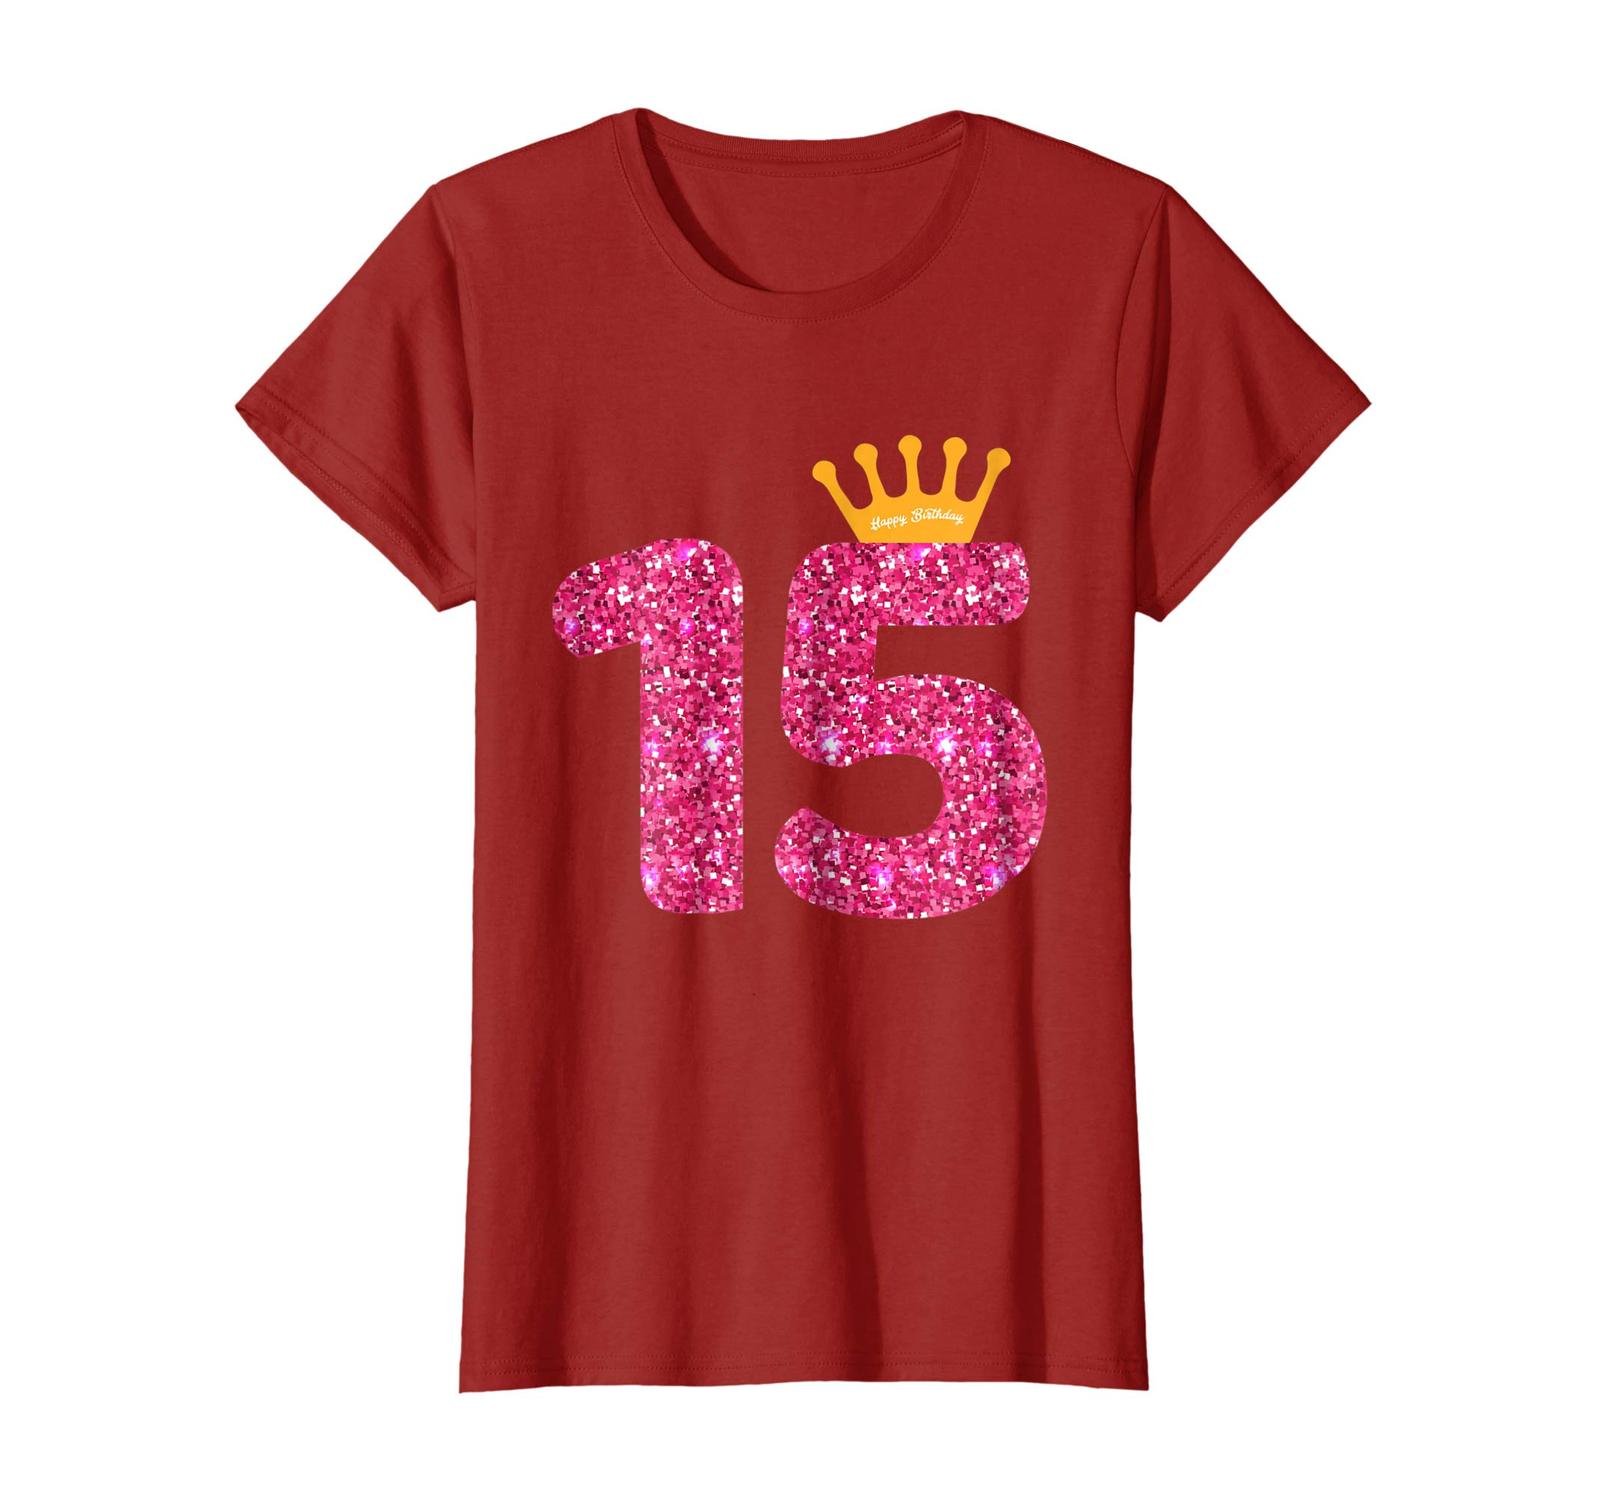 Dad Shirts - Happy Birthday Shirt Girls 15th Party 15 Years Old Bday ...